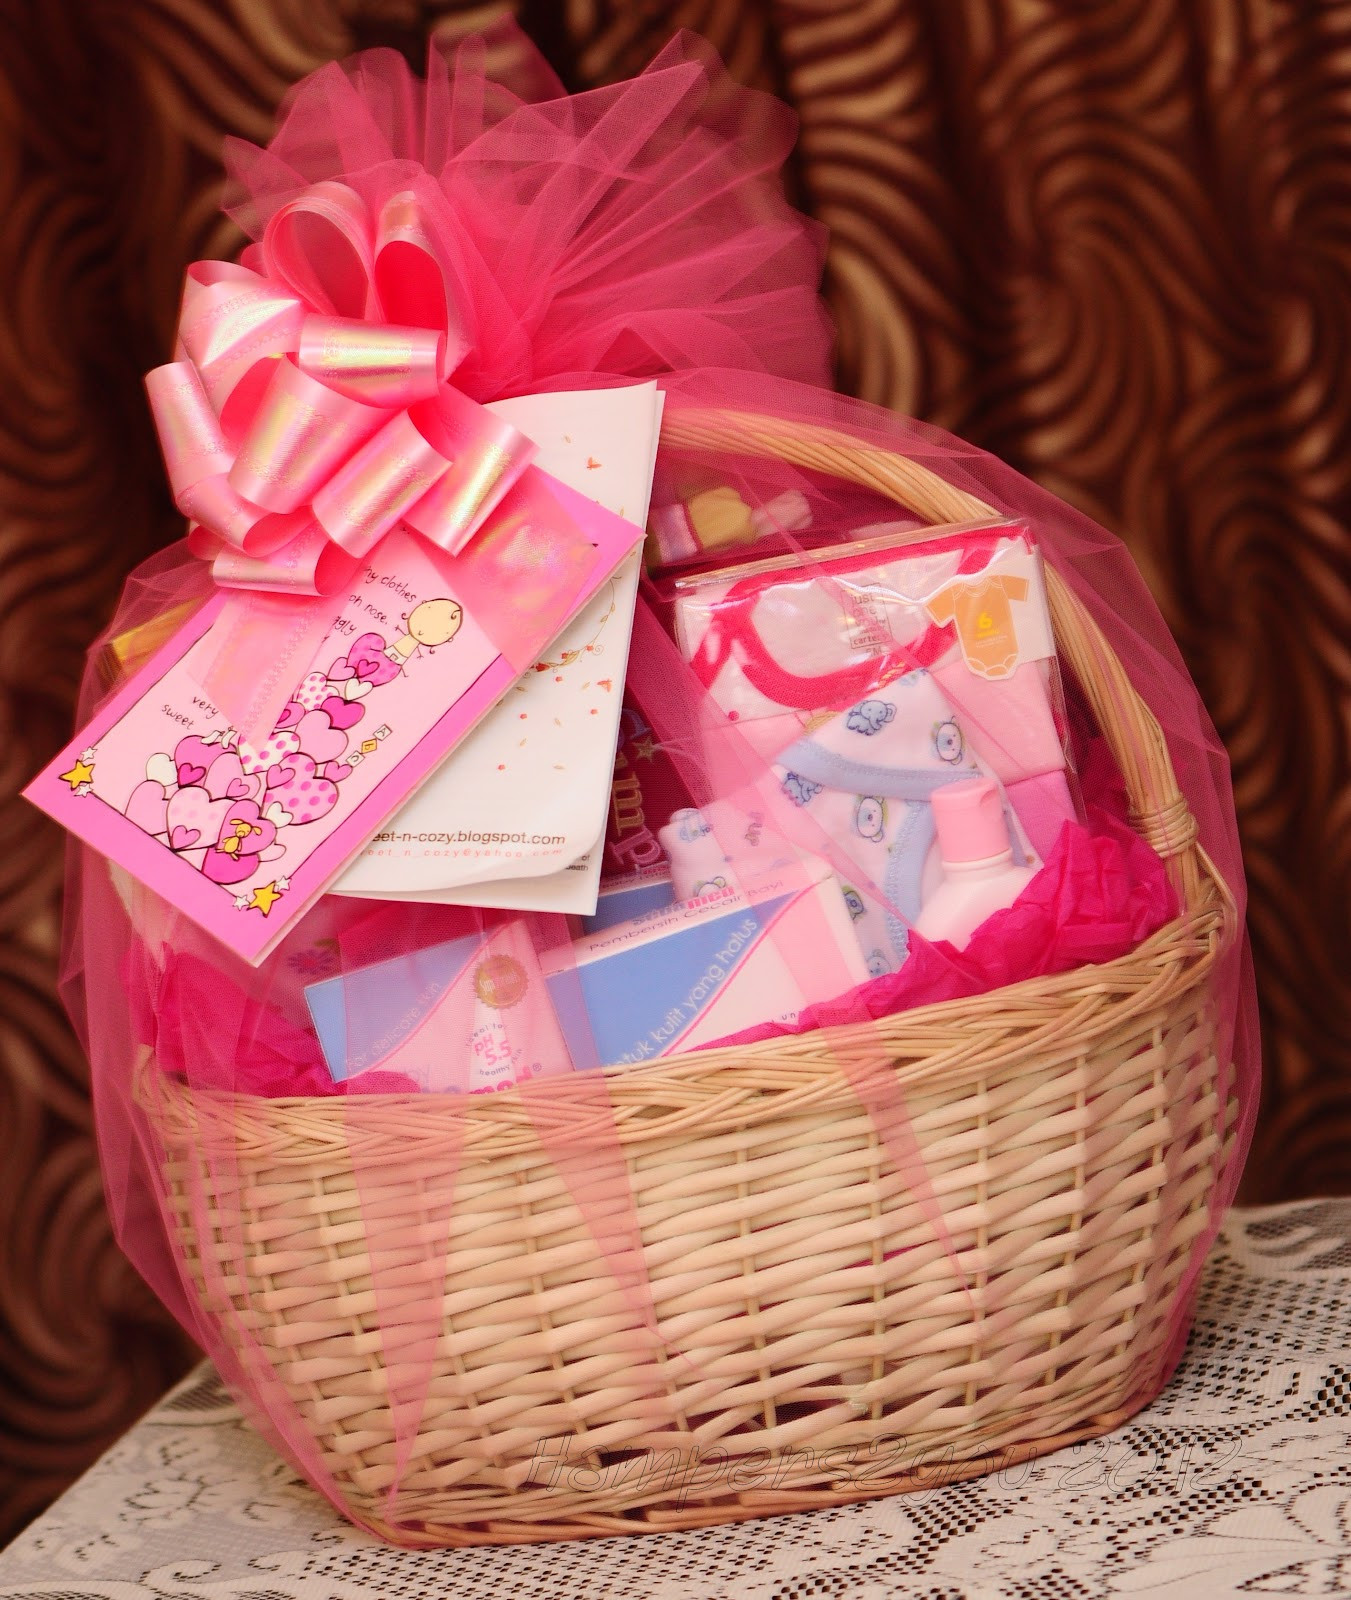 Gift Ideas For A New Girlfriend
 Hampers2you Baby Gift Baskets for Newborn Girl